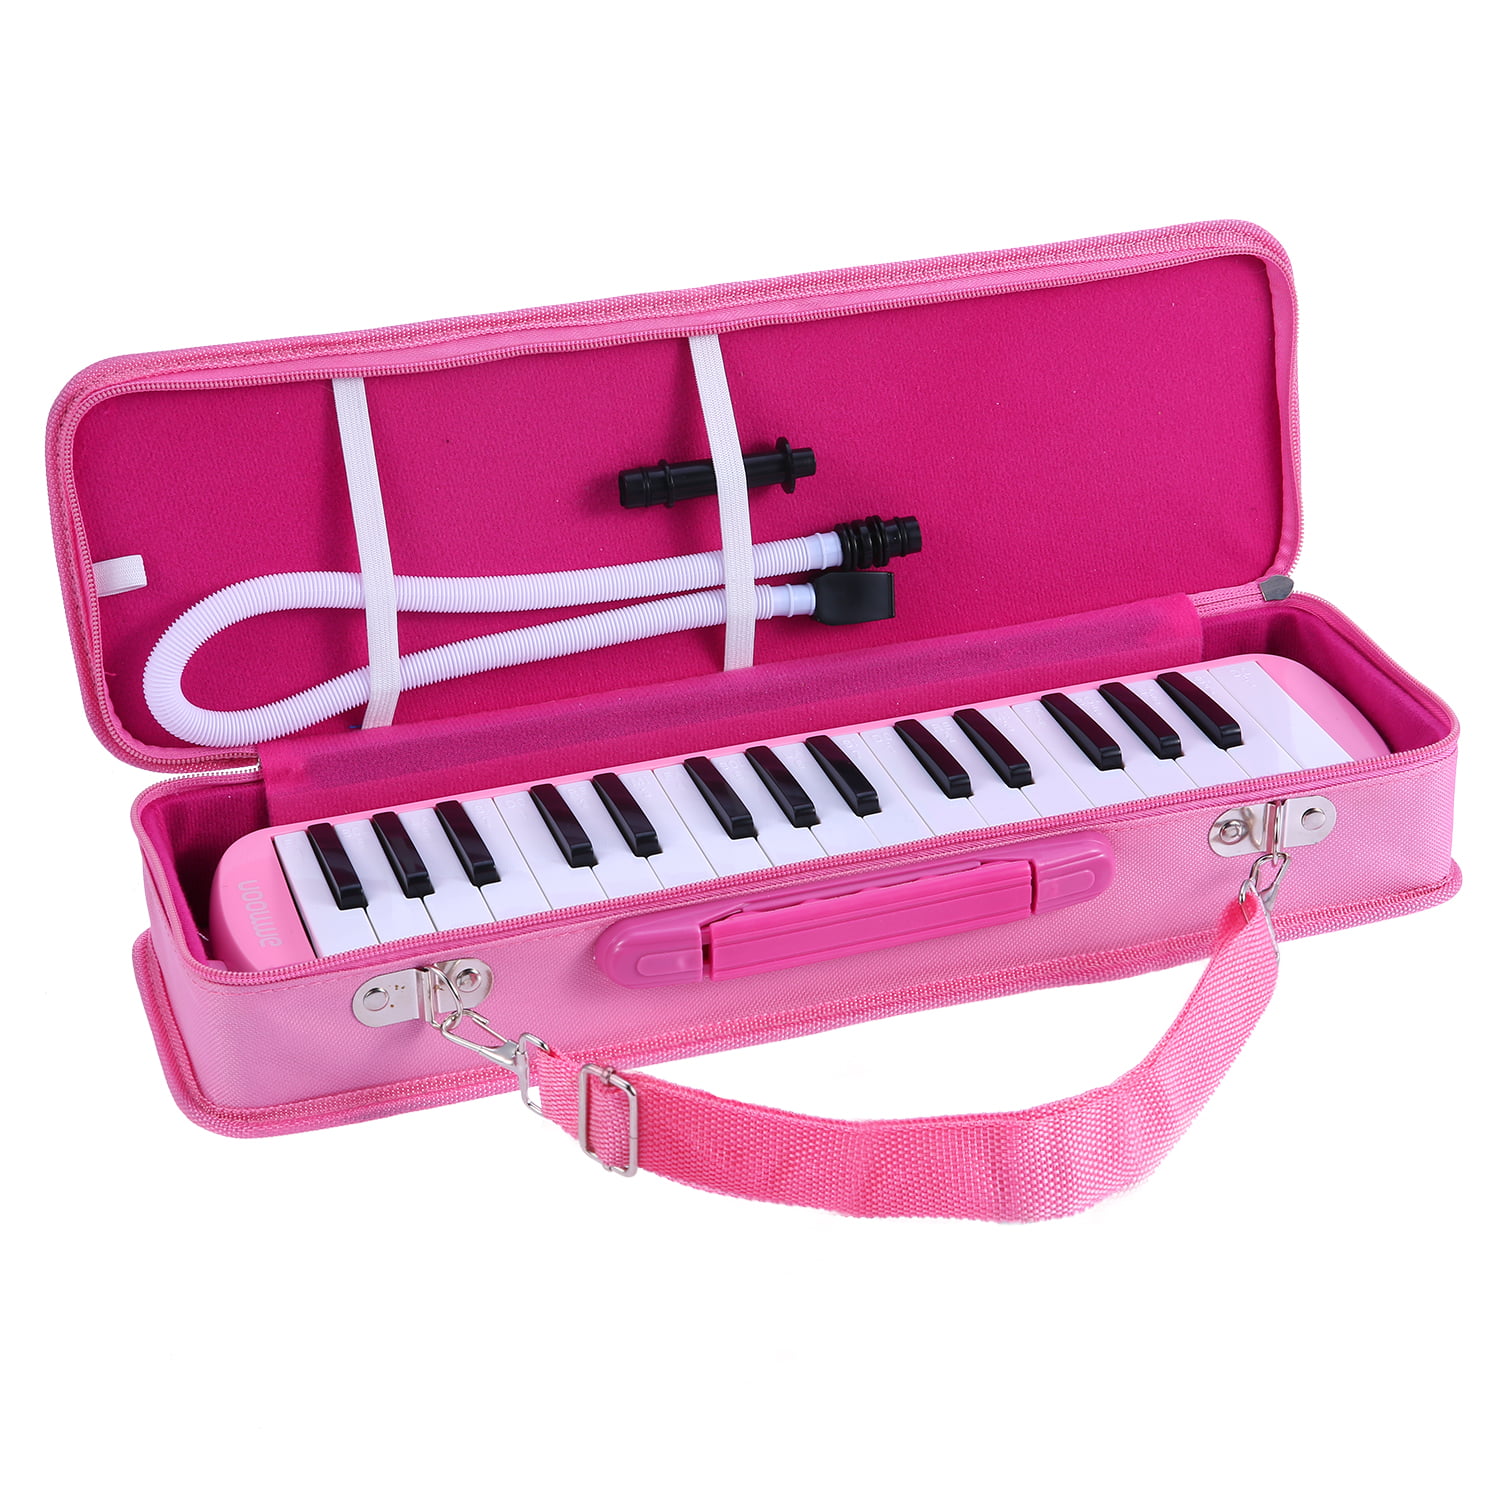 New Version Melodica Instrument with Mouthpiece 32 Key Premium Air Melodicas Piano Keyboard Style Portable with Carrying Bag Melodica 